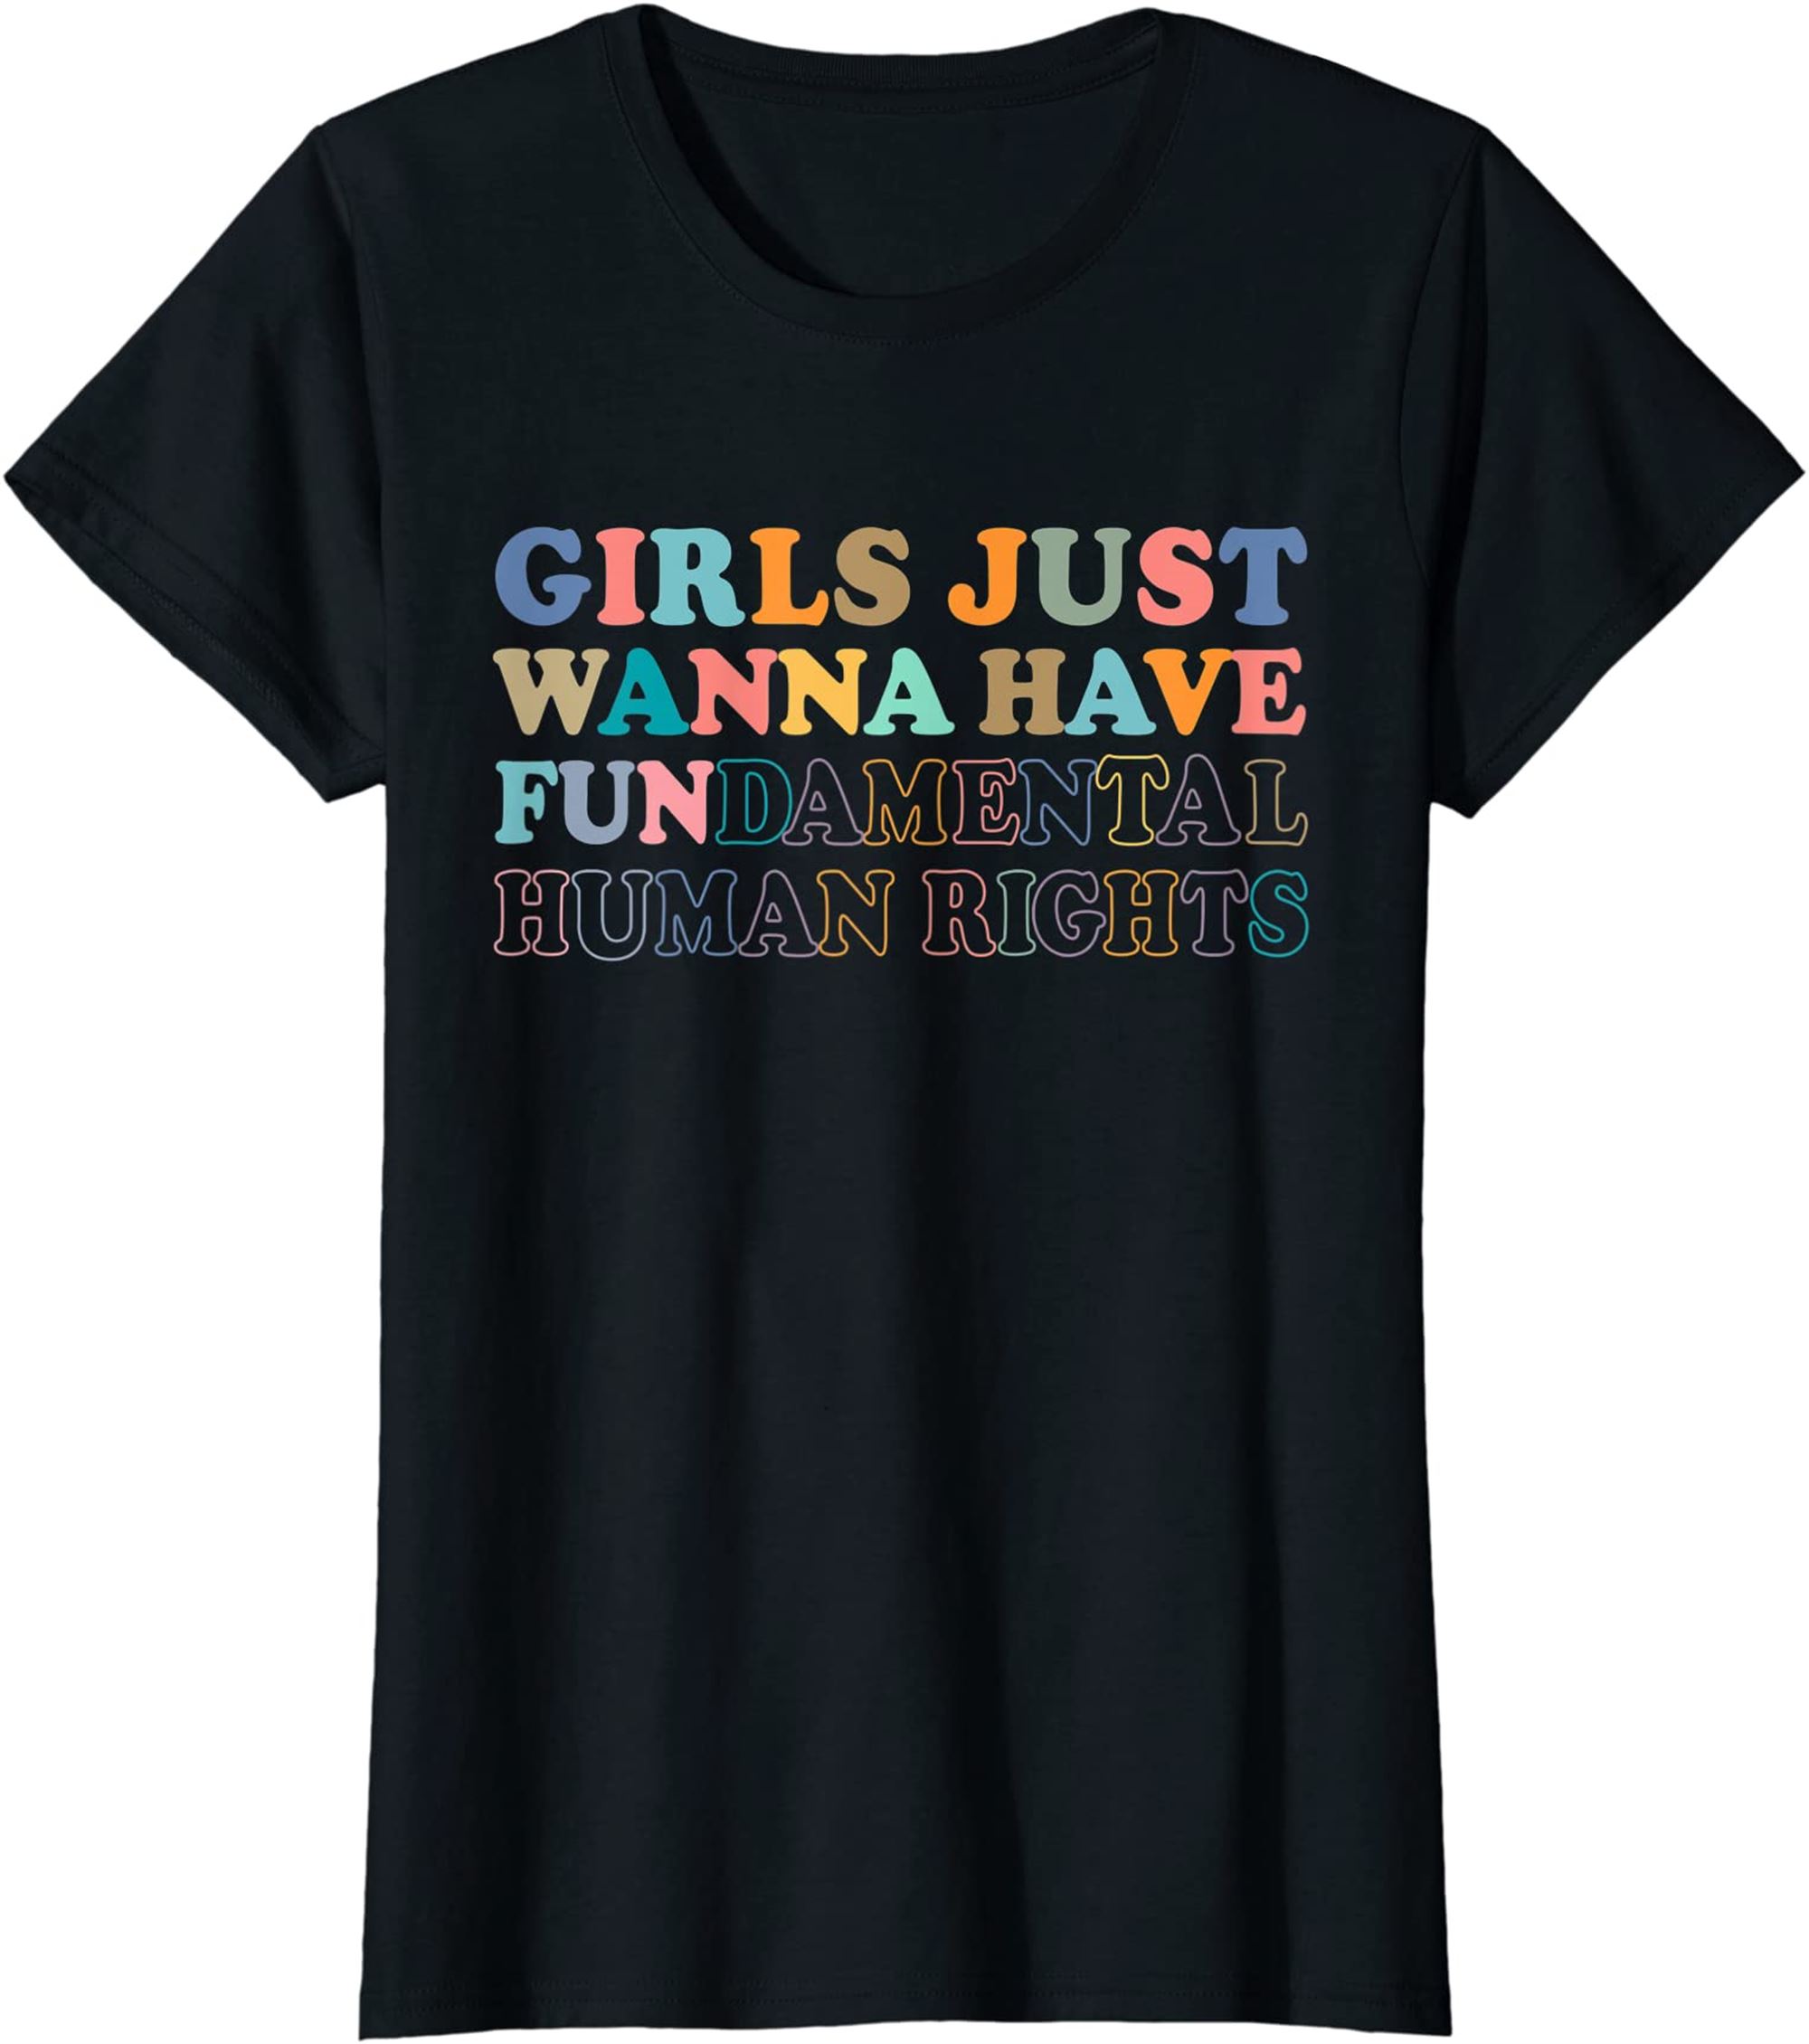 Womens Girls Just Wanna Have Fundamental Human Rights T-shirt Plus Size Up To 5xl